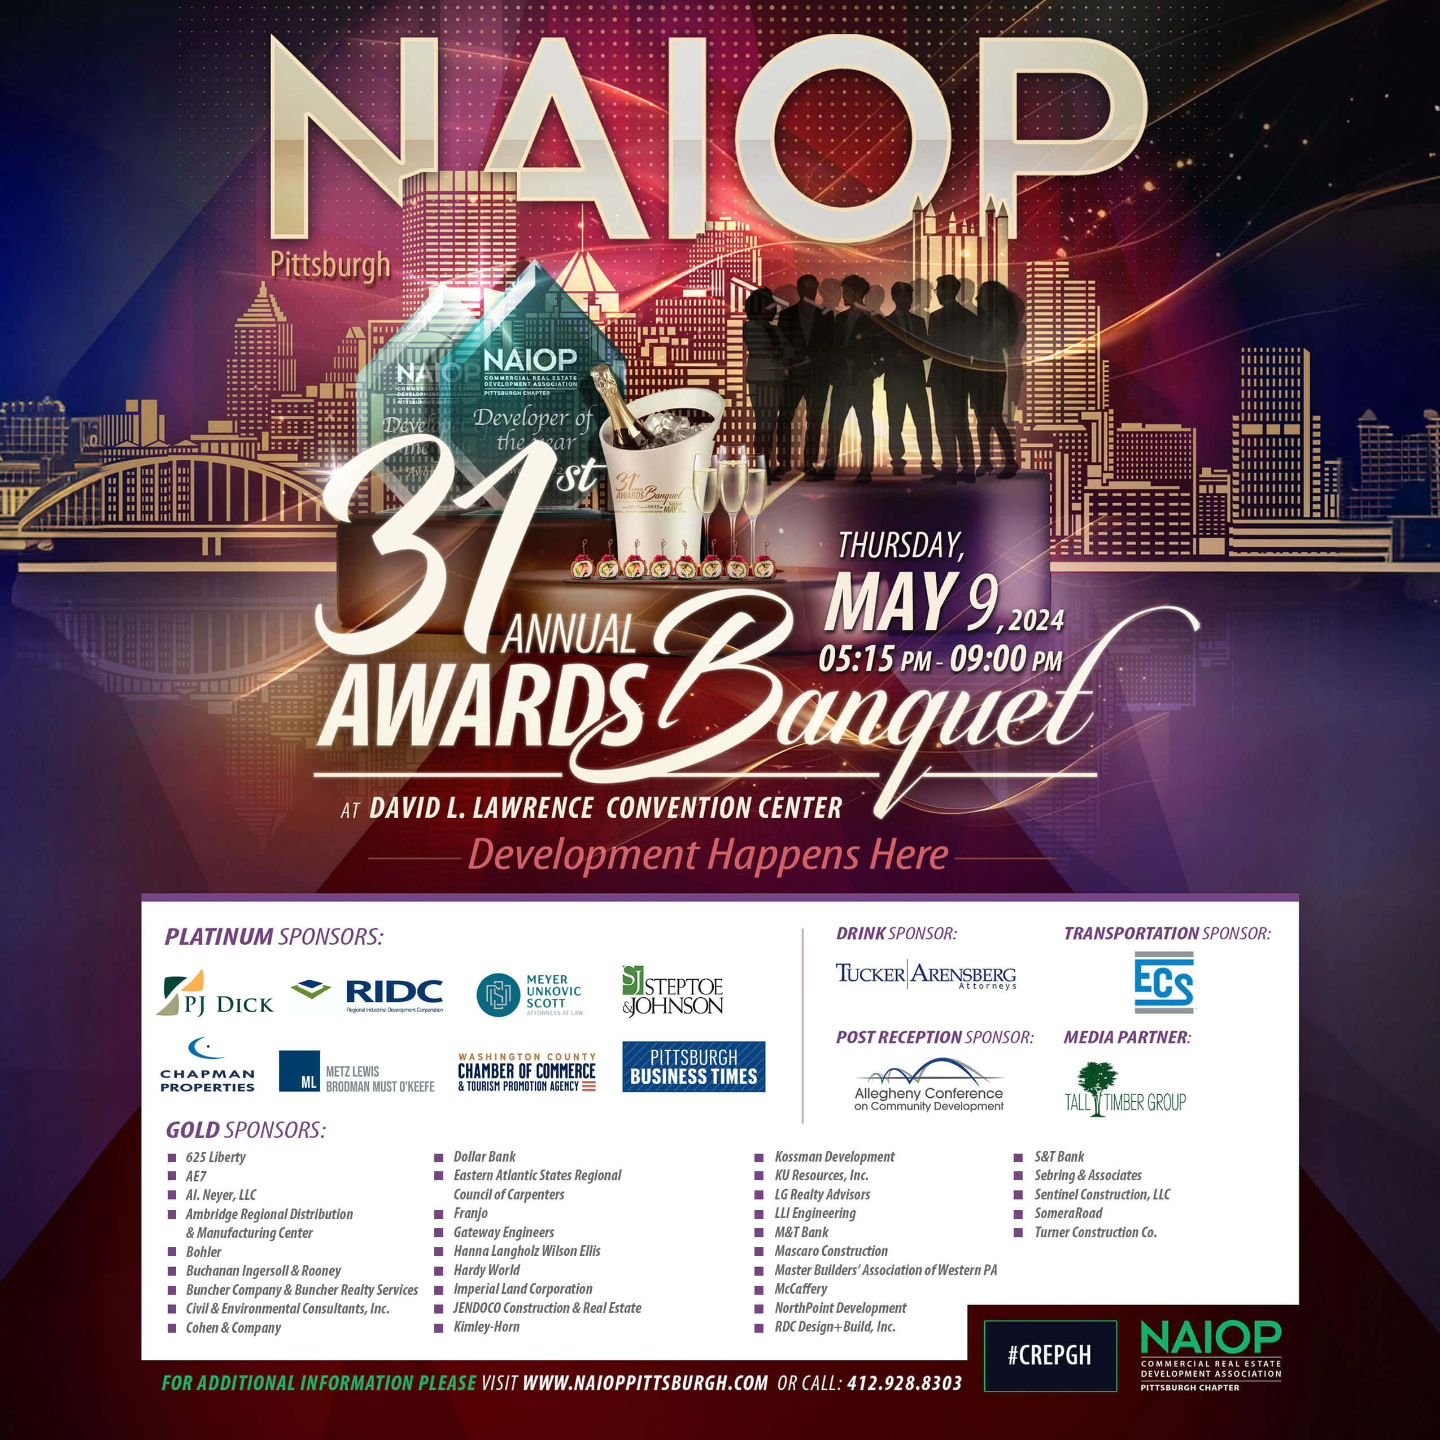 We're thrilled to be hosting the 31st Annual NAIOP Pittsburgh Awards Banquet tomorrow night, celebrating the strong contributions to the #CREpgh market with top awards!

Eight award winners will be honored, for their work in 2023 including:⁠
&bull; H